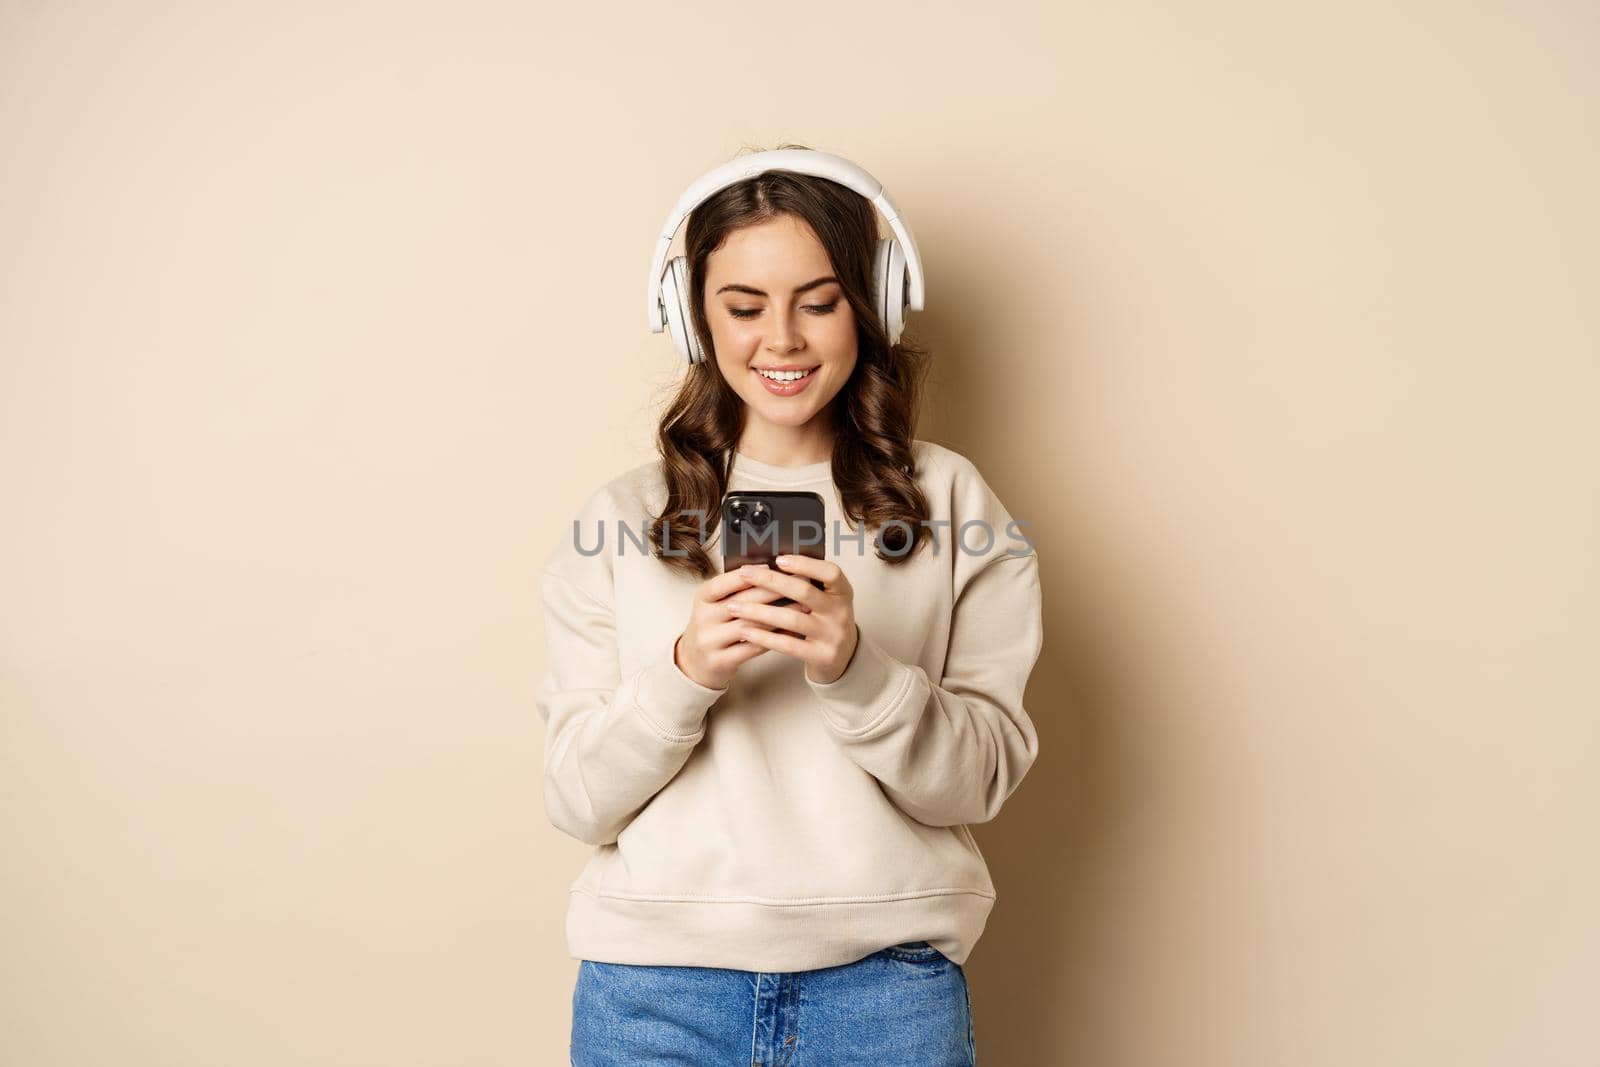 Smiling cute girl in headphones, looking at mobile phone, listening music or podcast, standing over beige background.